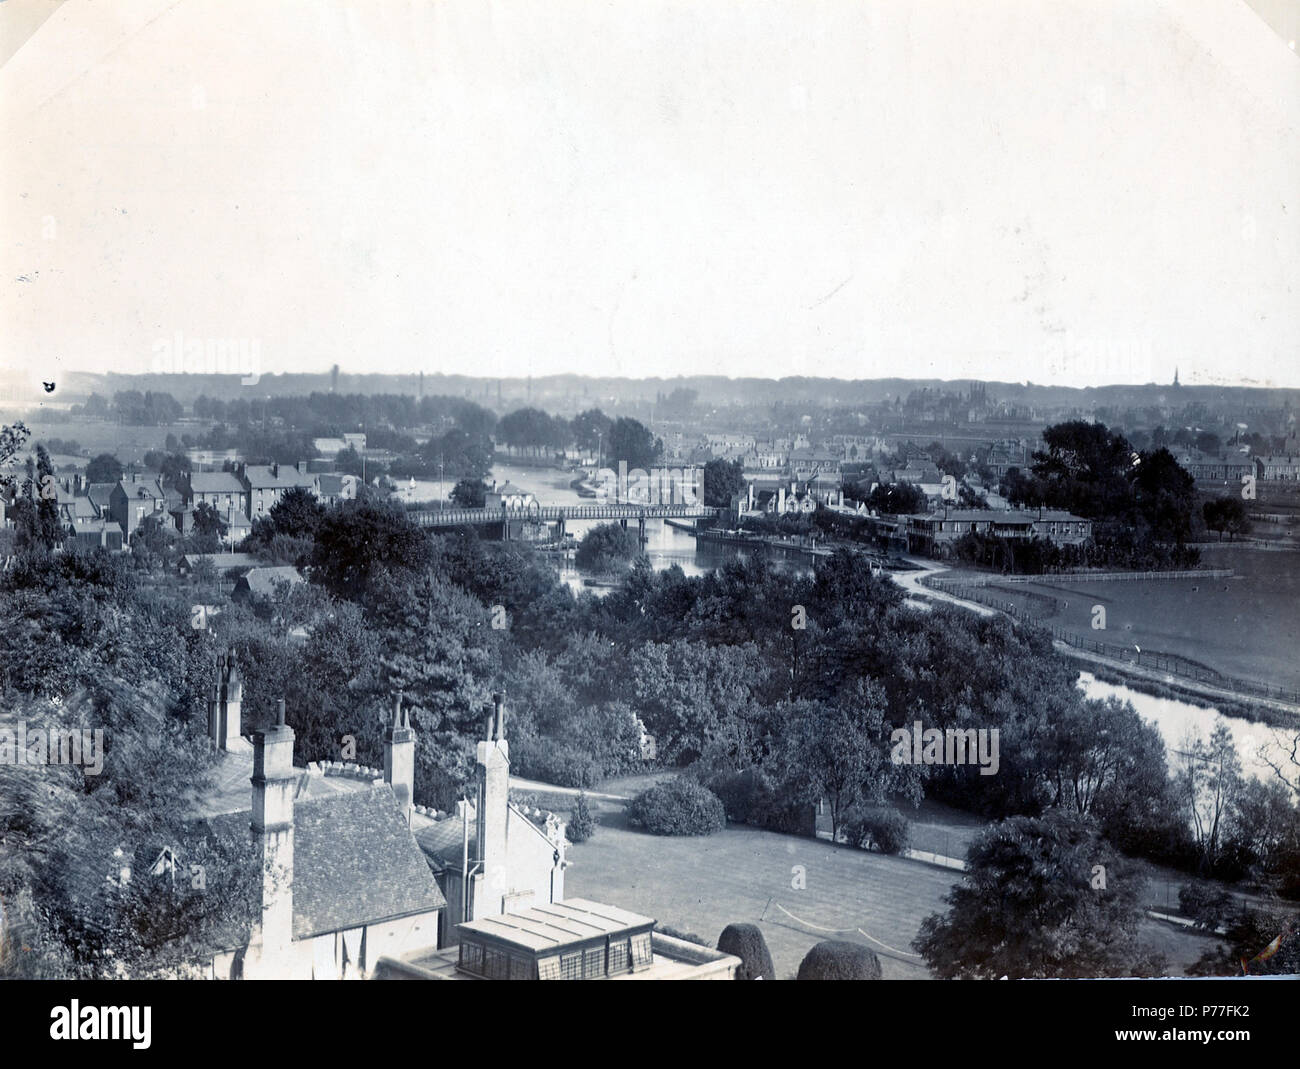 English: View from the tower of St. Peter's Church, Caversham, looking towards Caversham Bridge and Reading, c. 1900. Caversham Old Rectory (later known as Caversham Court) is in the foreground, to the left, and the White Hart Hotel appears at the Reading end of the bridge. 1900-1909 : photograph by H. W. Taunt. 1900 61 View from the tower of St. Peter's Church, Caversham, c. 1900 Stock Photo